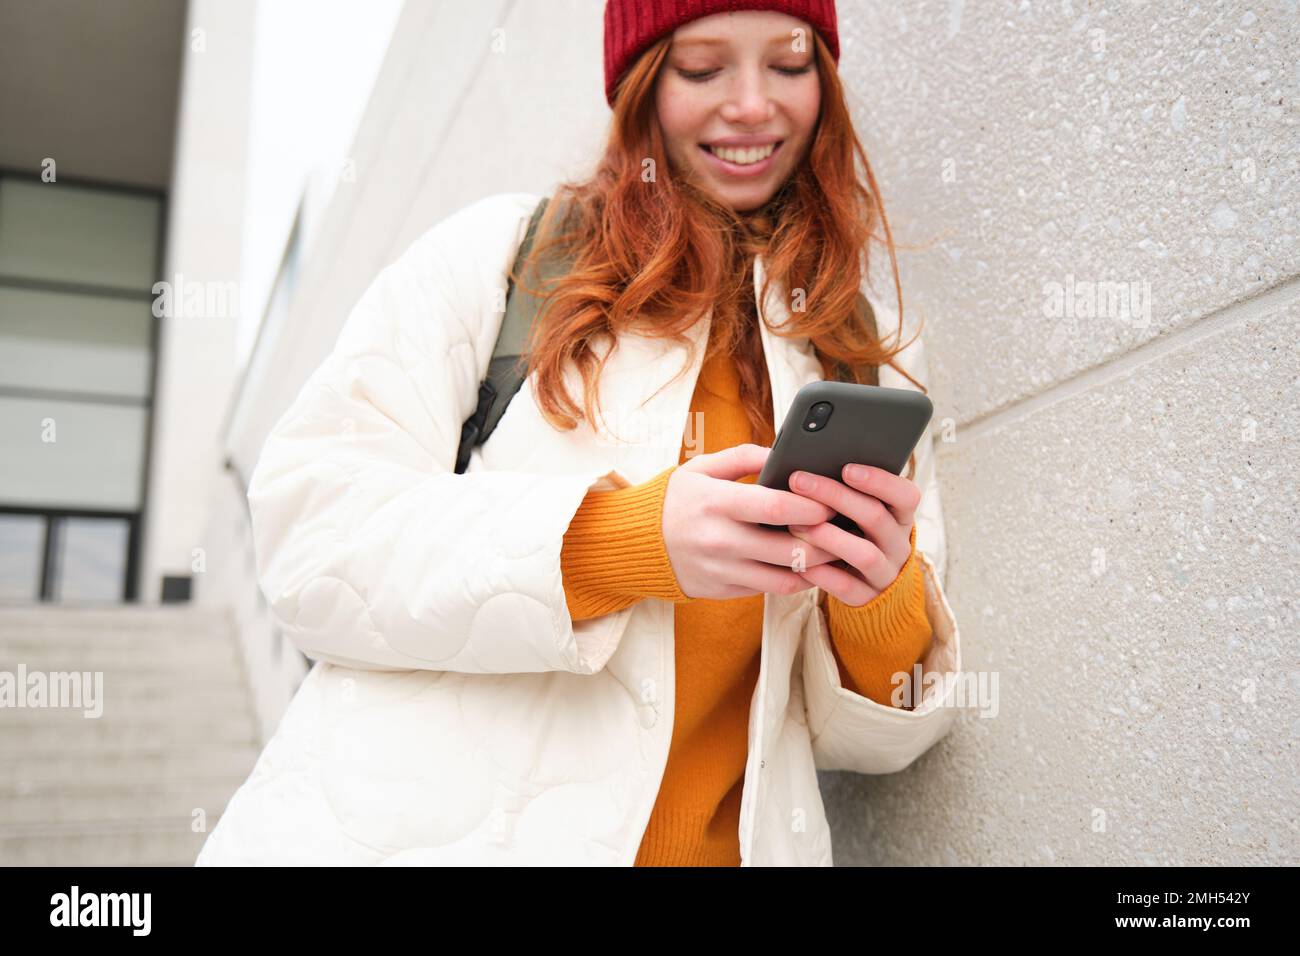 Redhead girl, young woman tourist with backpack, holds smartphone, looks for route on mobile application, searches for hotel on phone map, smiles Stock Photo